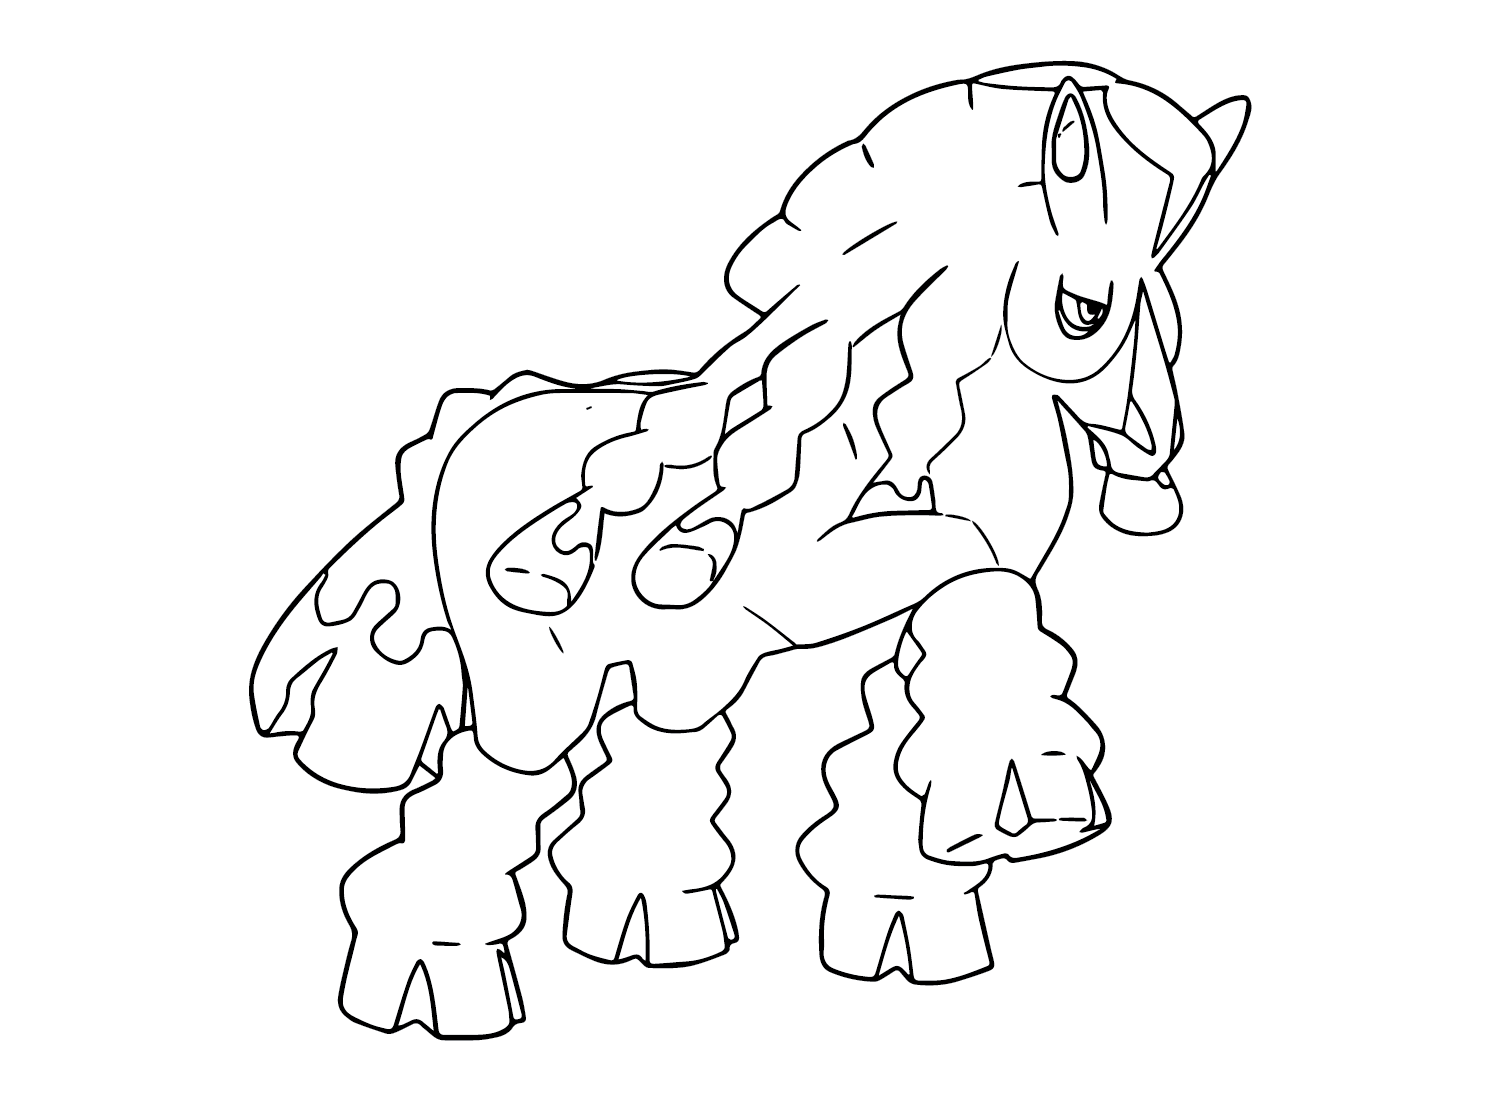 Mudsdale to Print Coloring Page